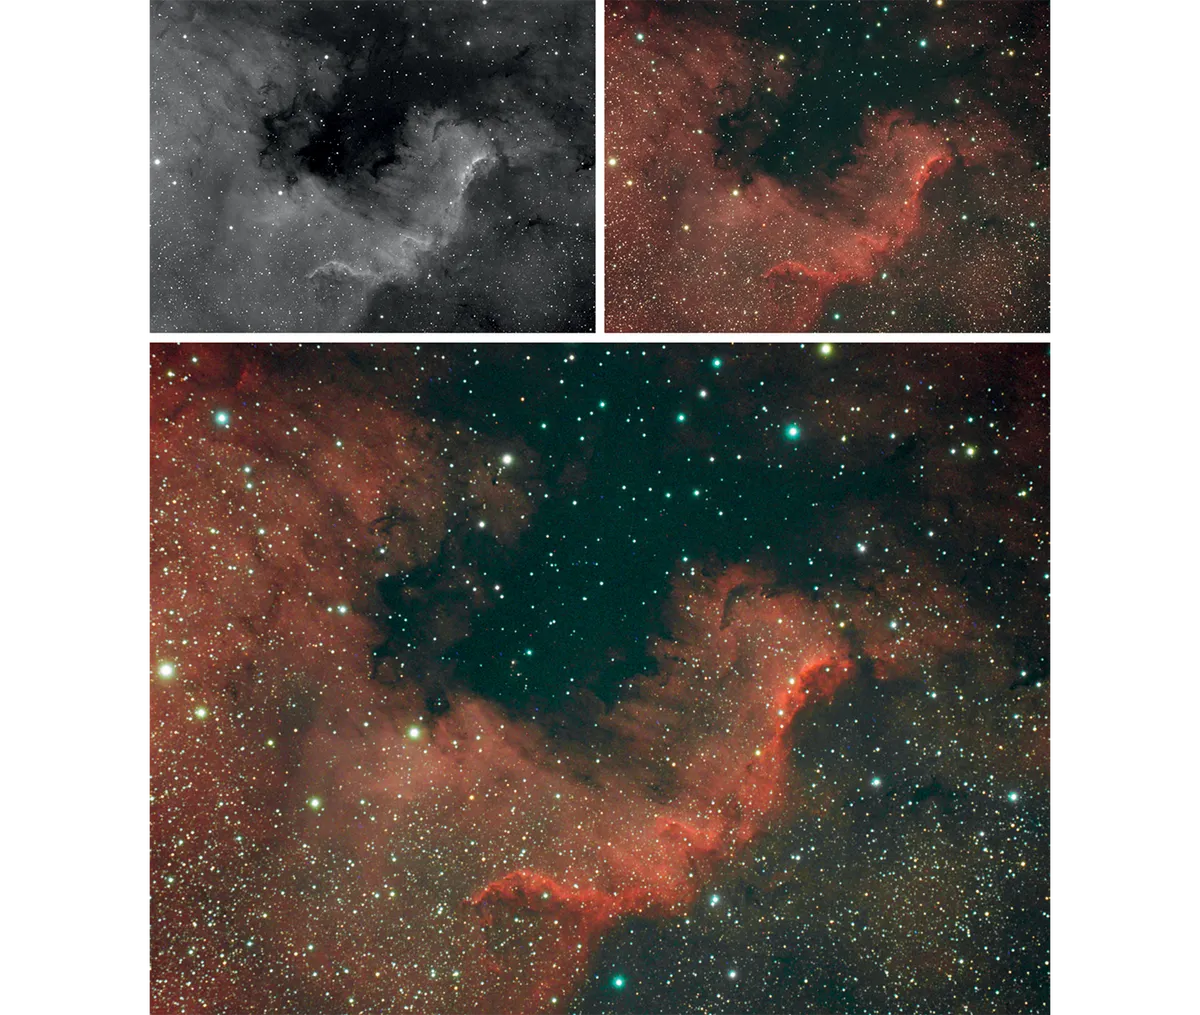 Combining luminance and RGB data – top left and top right – allowed us to create this much more detailed composite image of the North America Nebula, NGC 7000, in the constellation of Cygnus. Credit: Steve Richards